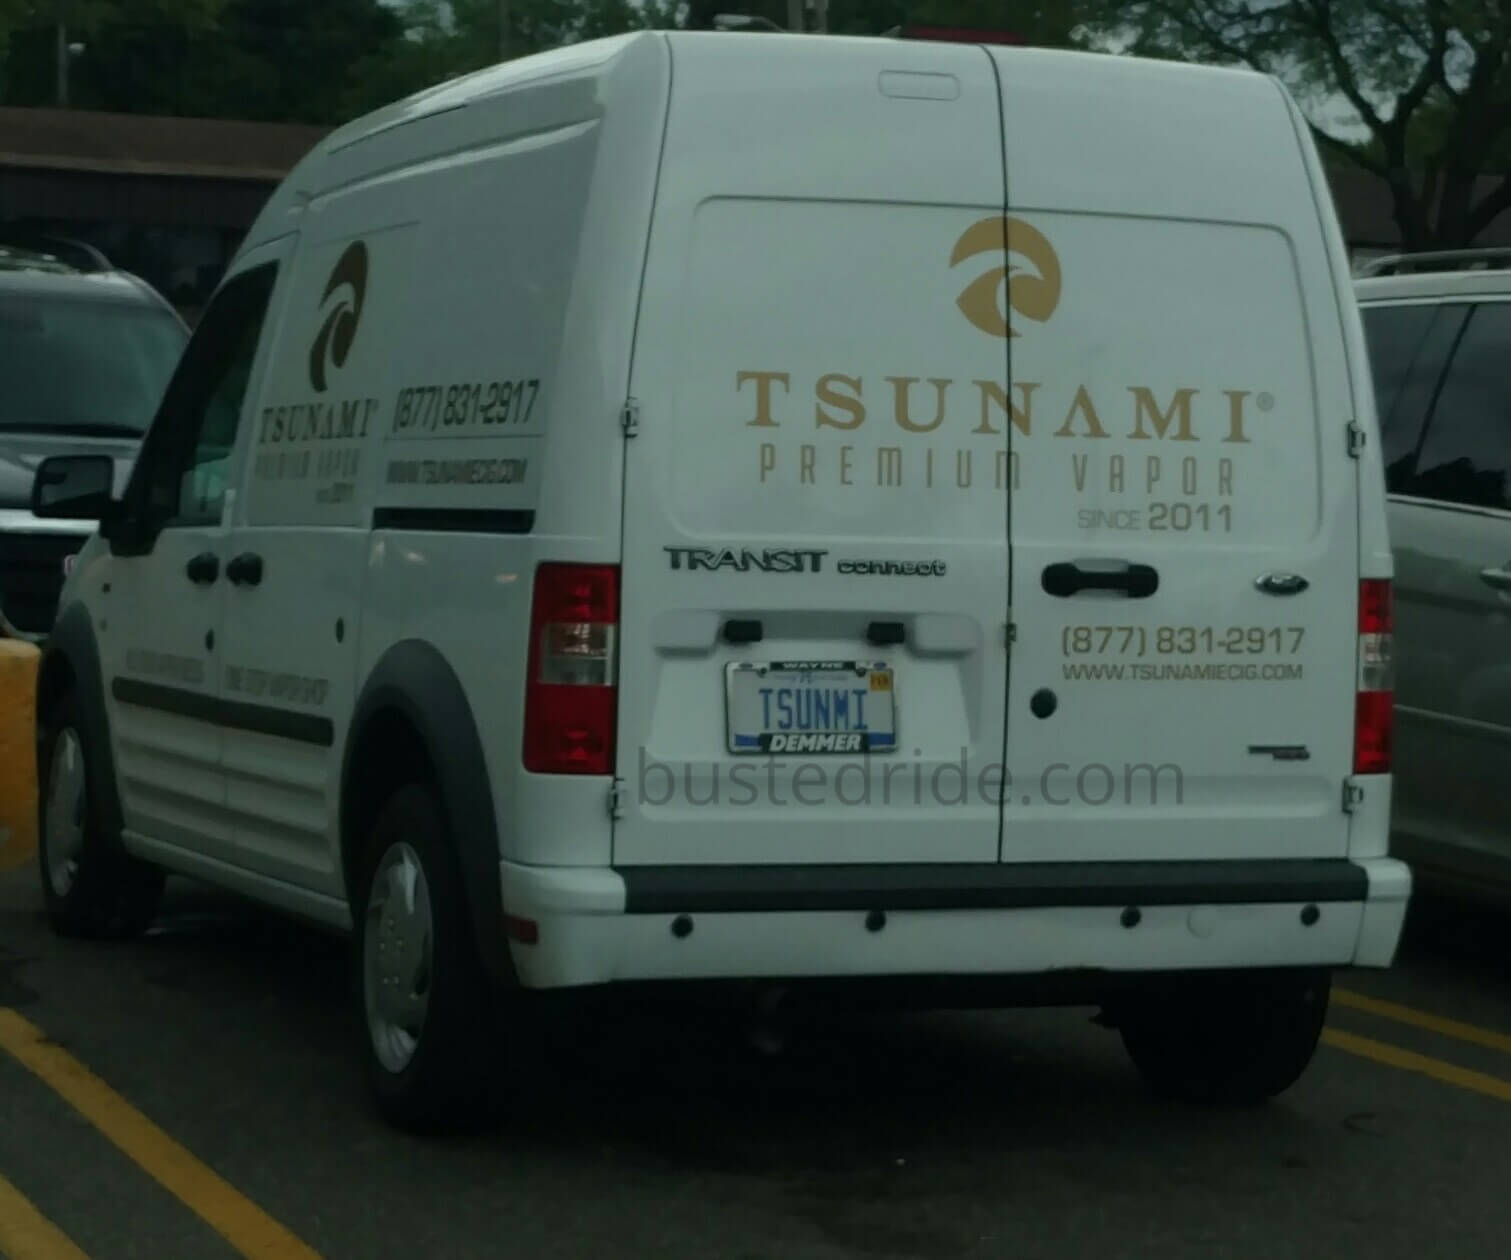 TSUNMI - Vanity License Plate by Busted Ride